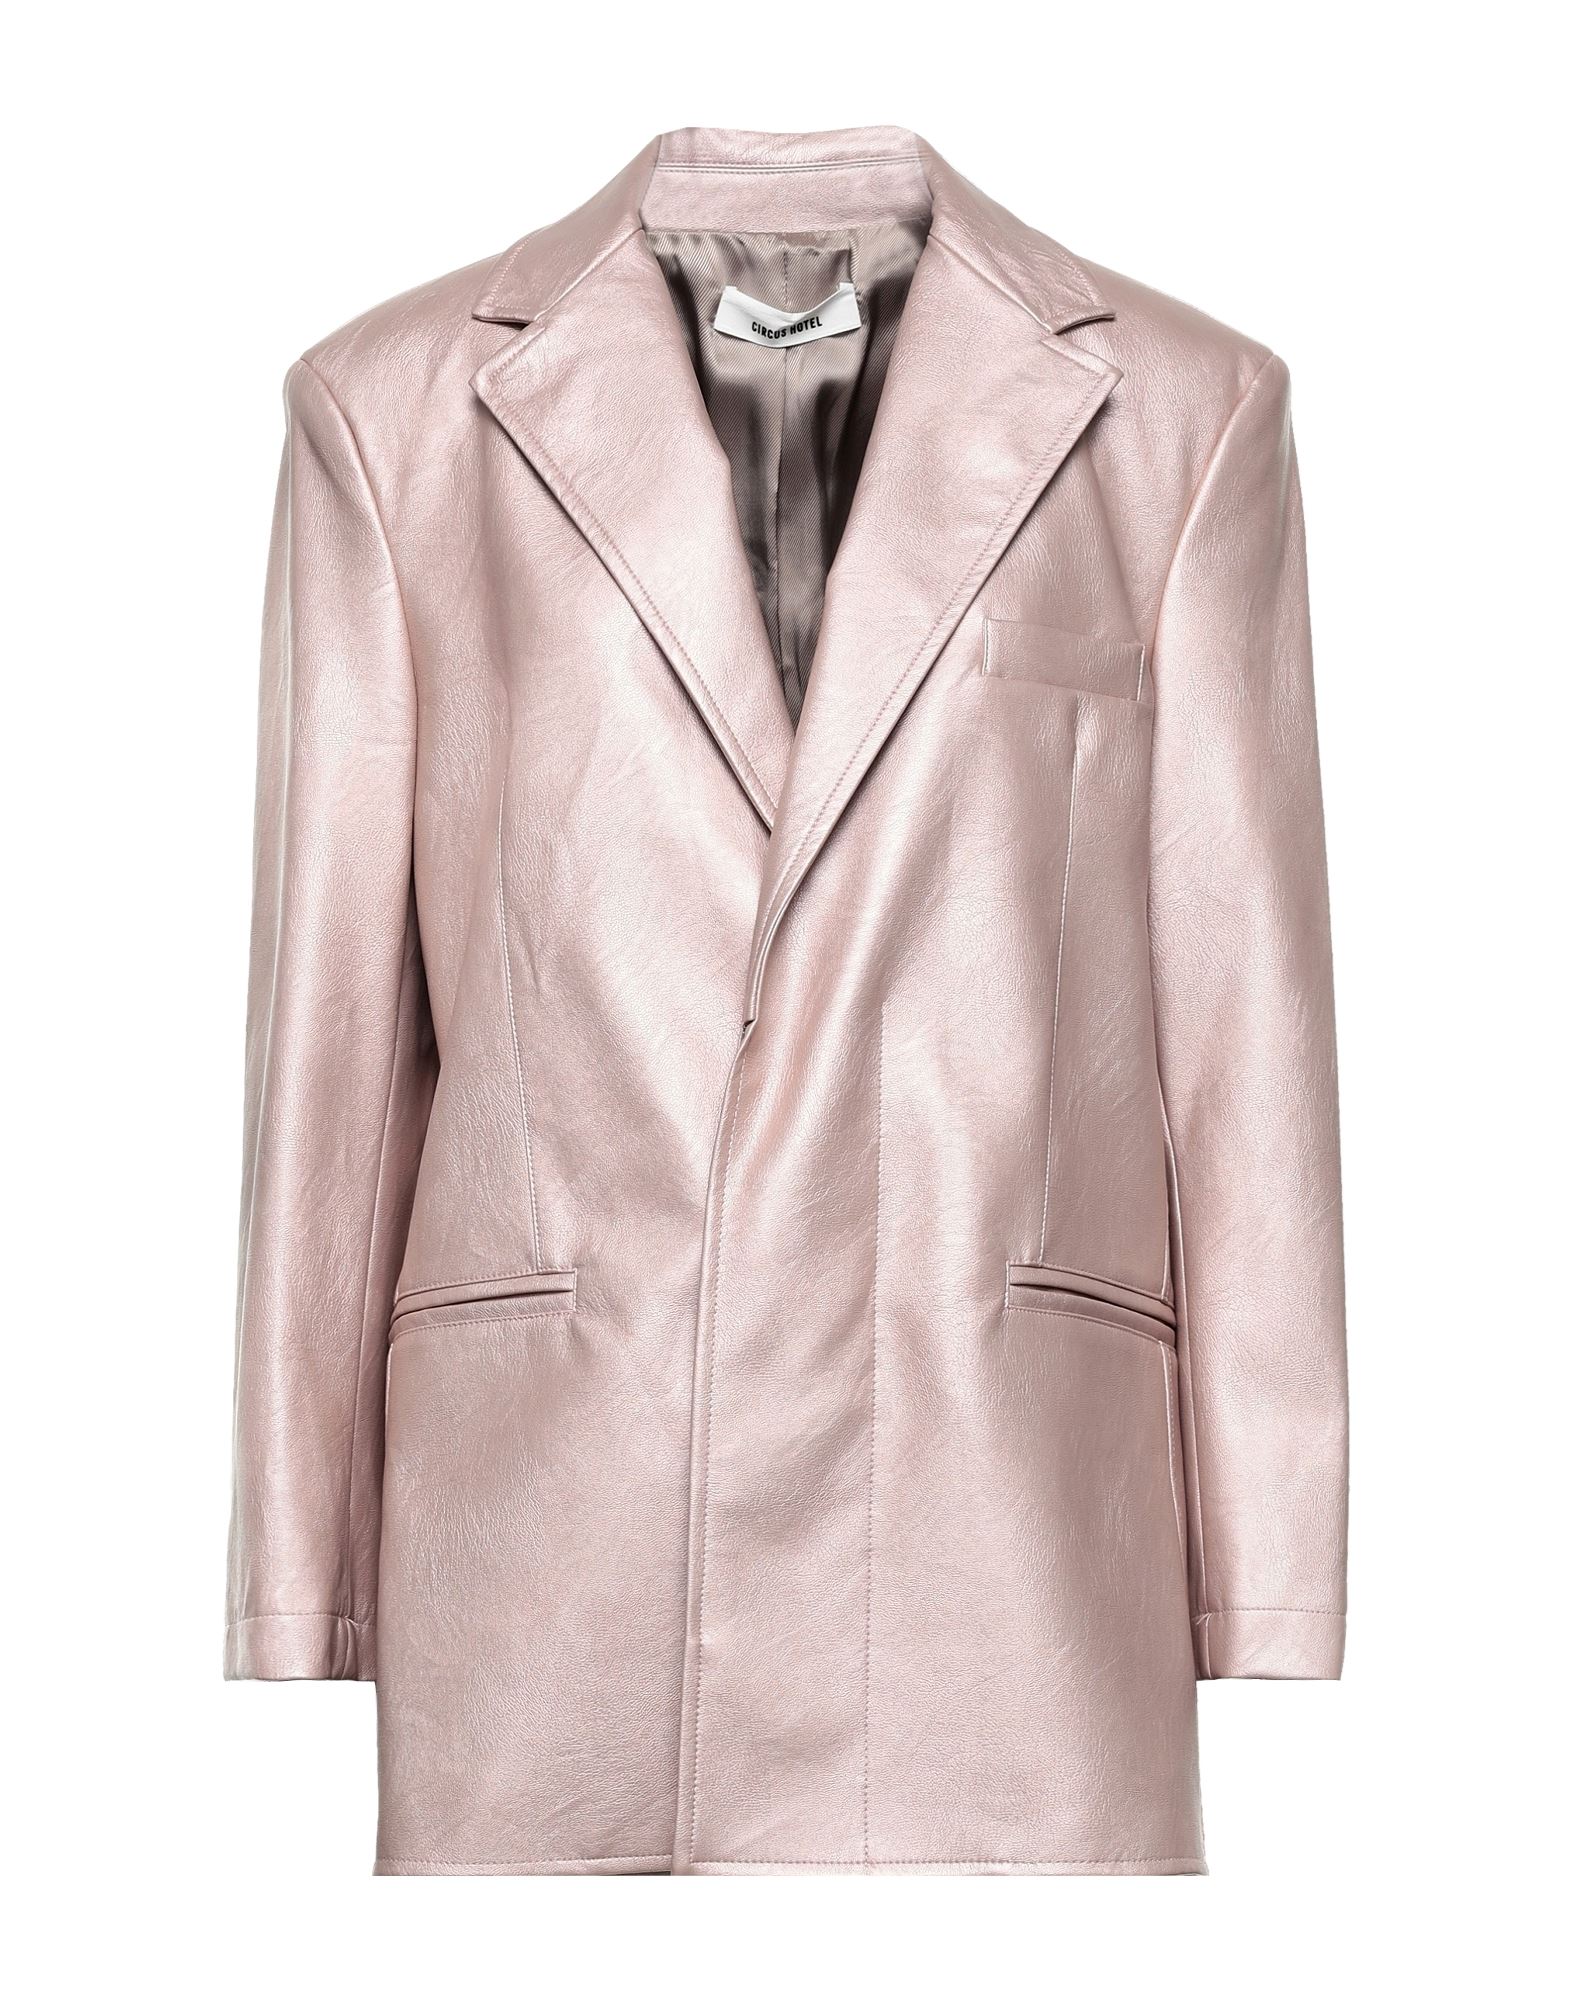 Circus Hotel Suit Jackets In Rose Gold